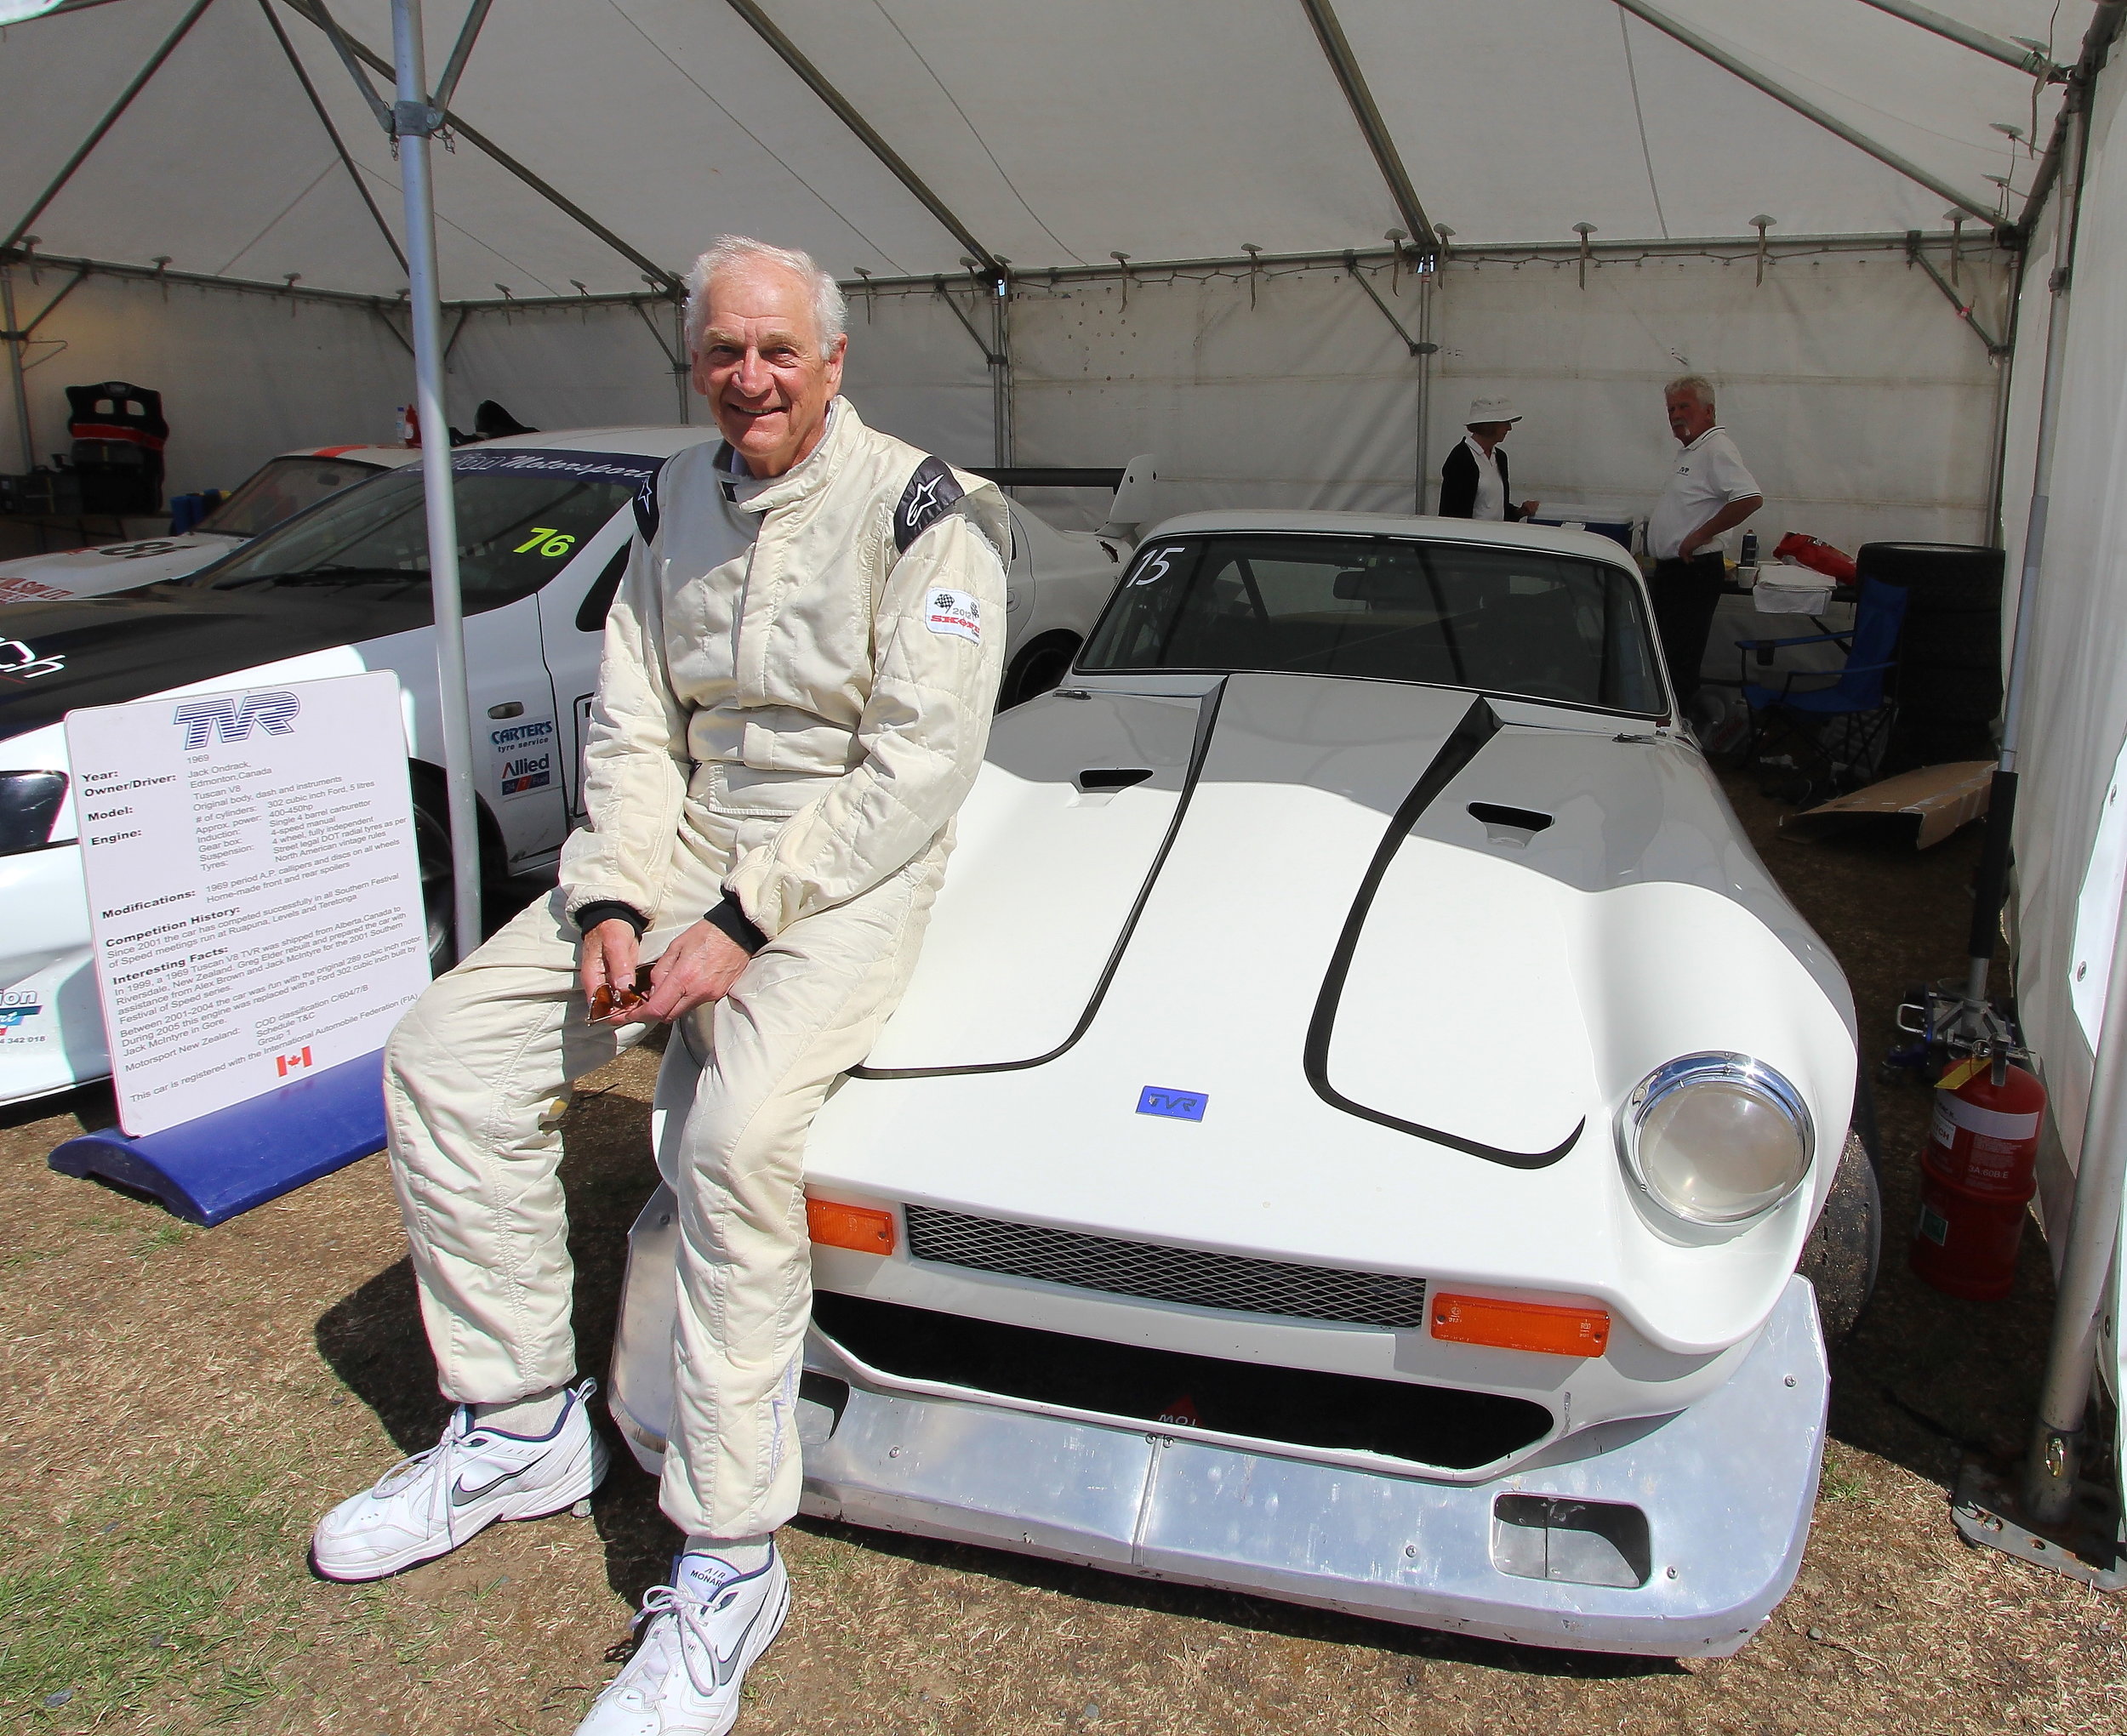 Always fast: Jack Ondrack (Canada) returns every year to pilot his extremely quick TVR